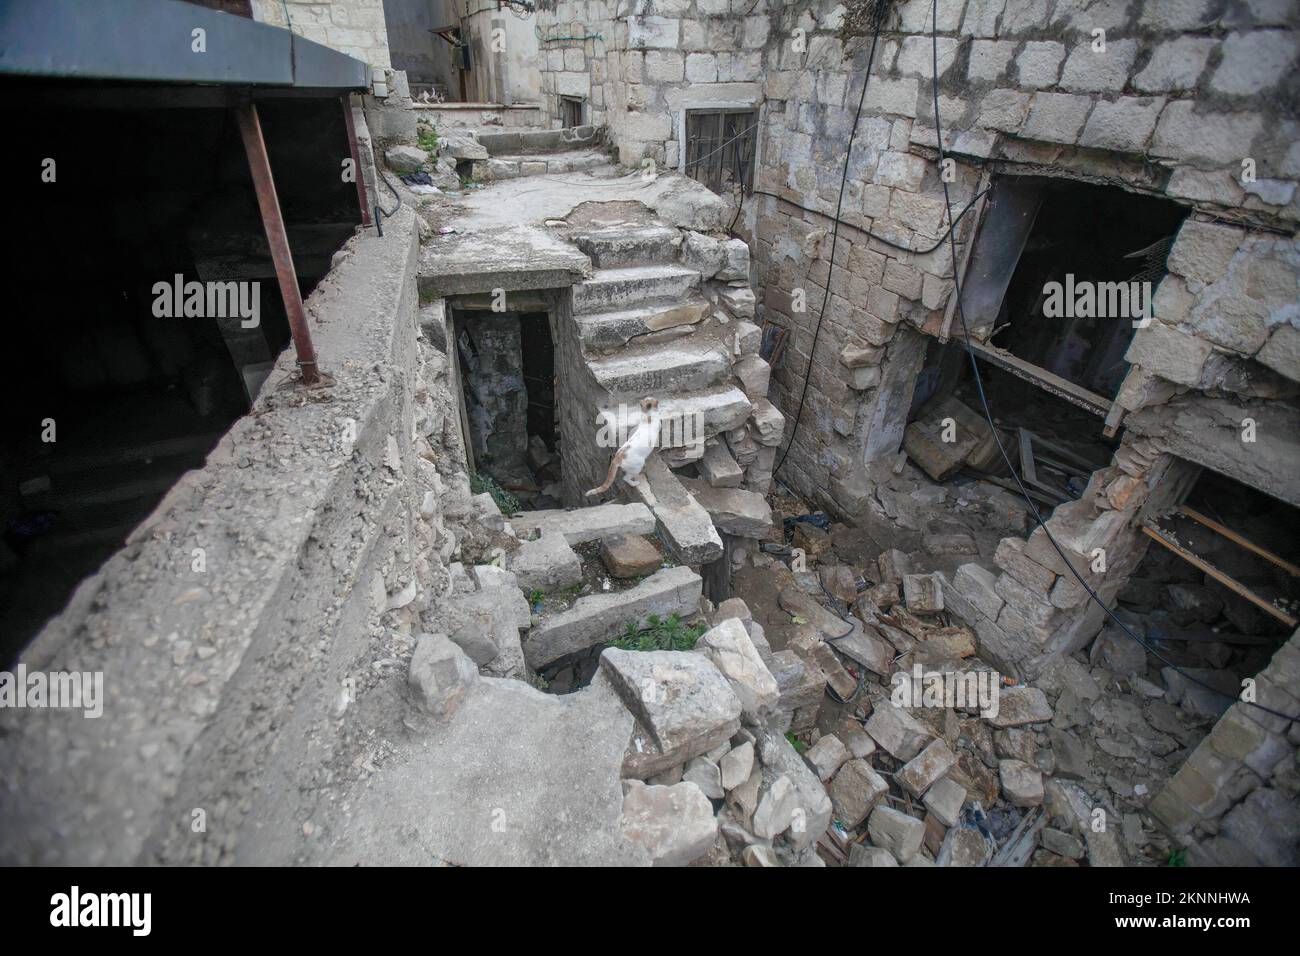 A view of the shelter in which armed Palestinians from the Lions' Den group were hiding in the old city of Nablus in the West Bank. The Israeli army forces destroyed it and assassinated the Palestinian gunmen who were in the shelter during their operation against these groups. Stock Photo